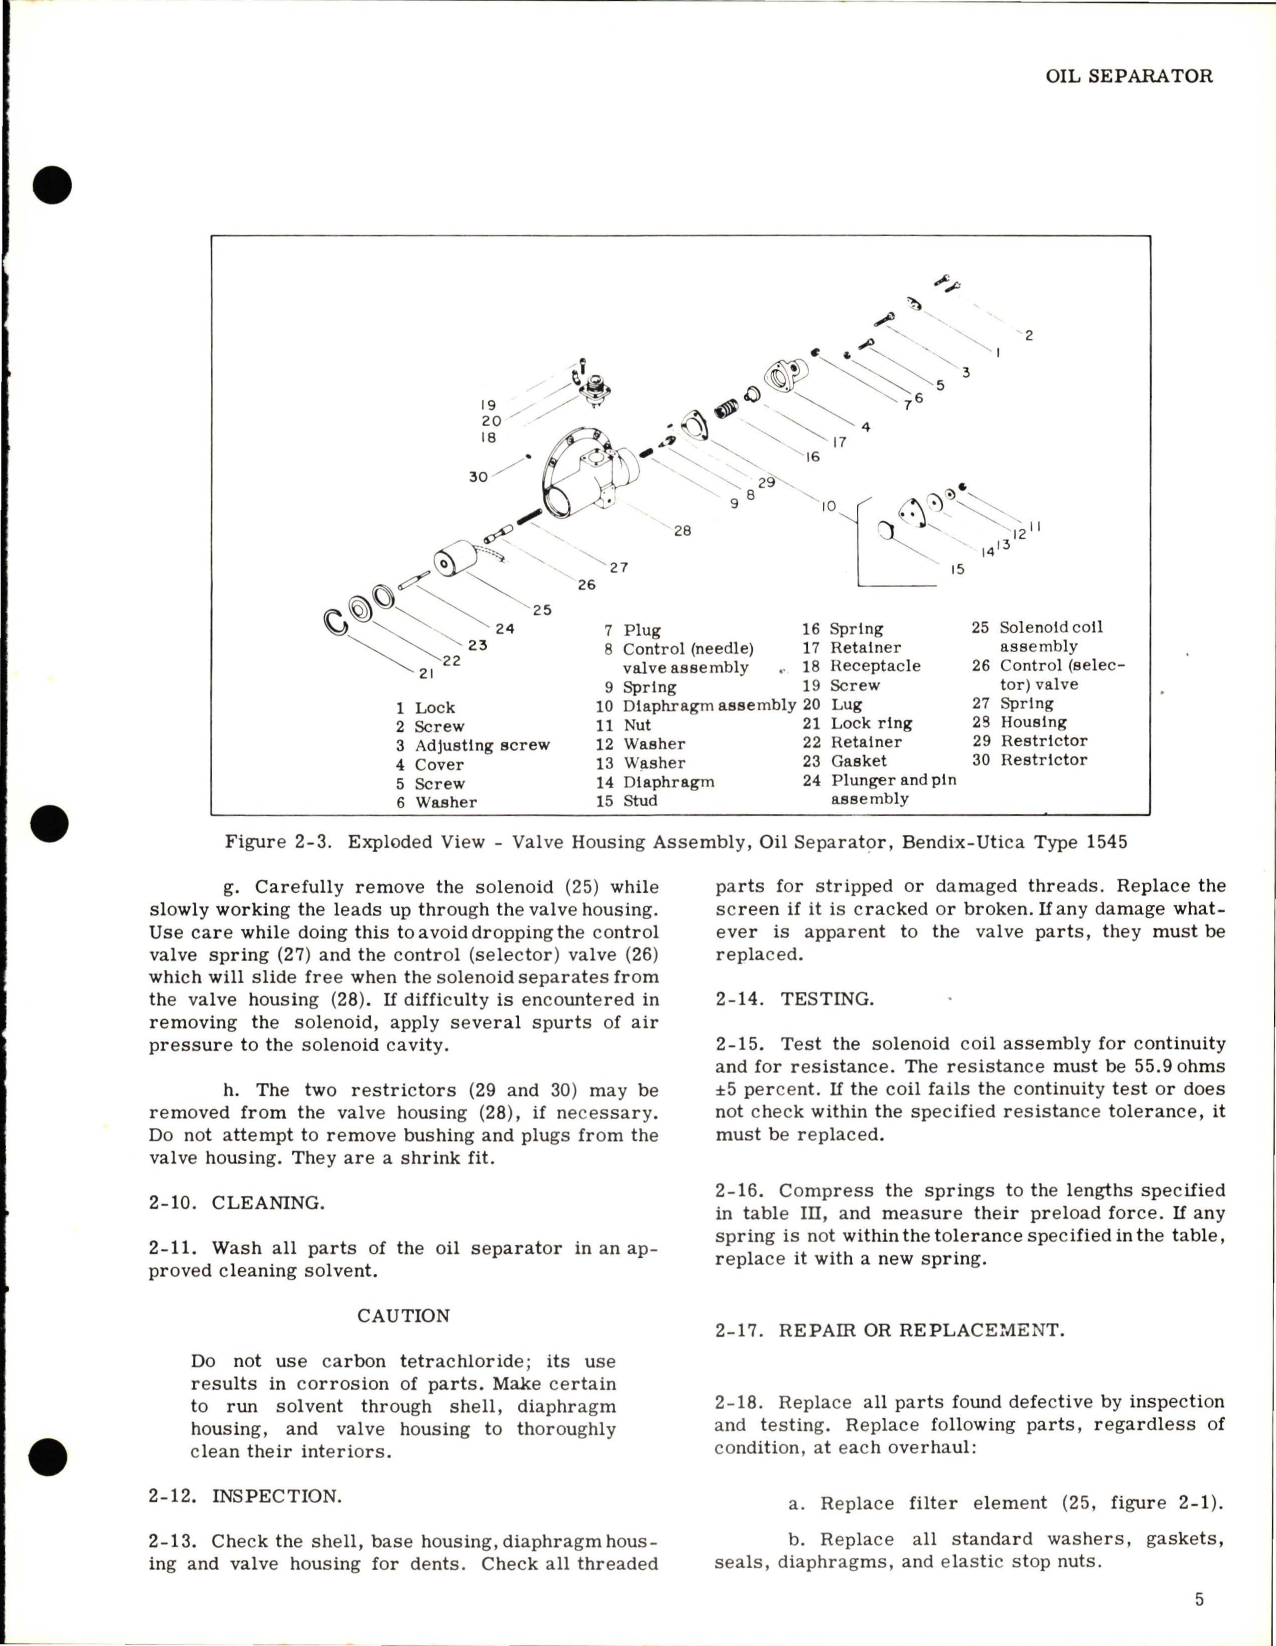 Sample page 9 from AirCorps Library document: Overhaul Instructions for Oil Separator - Section 1-1